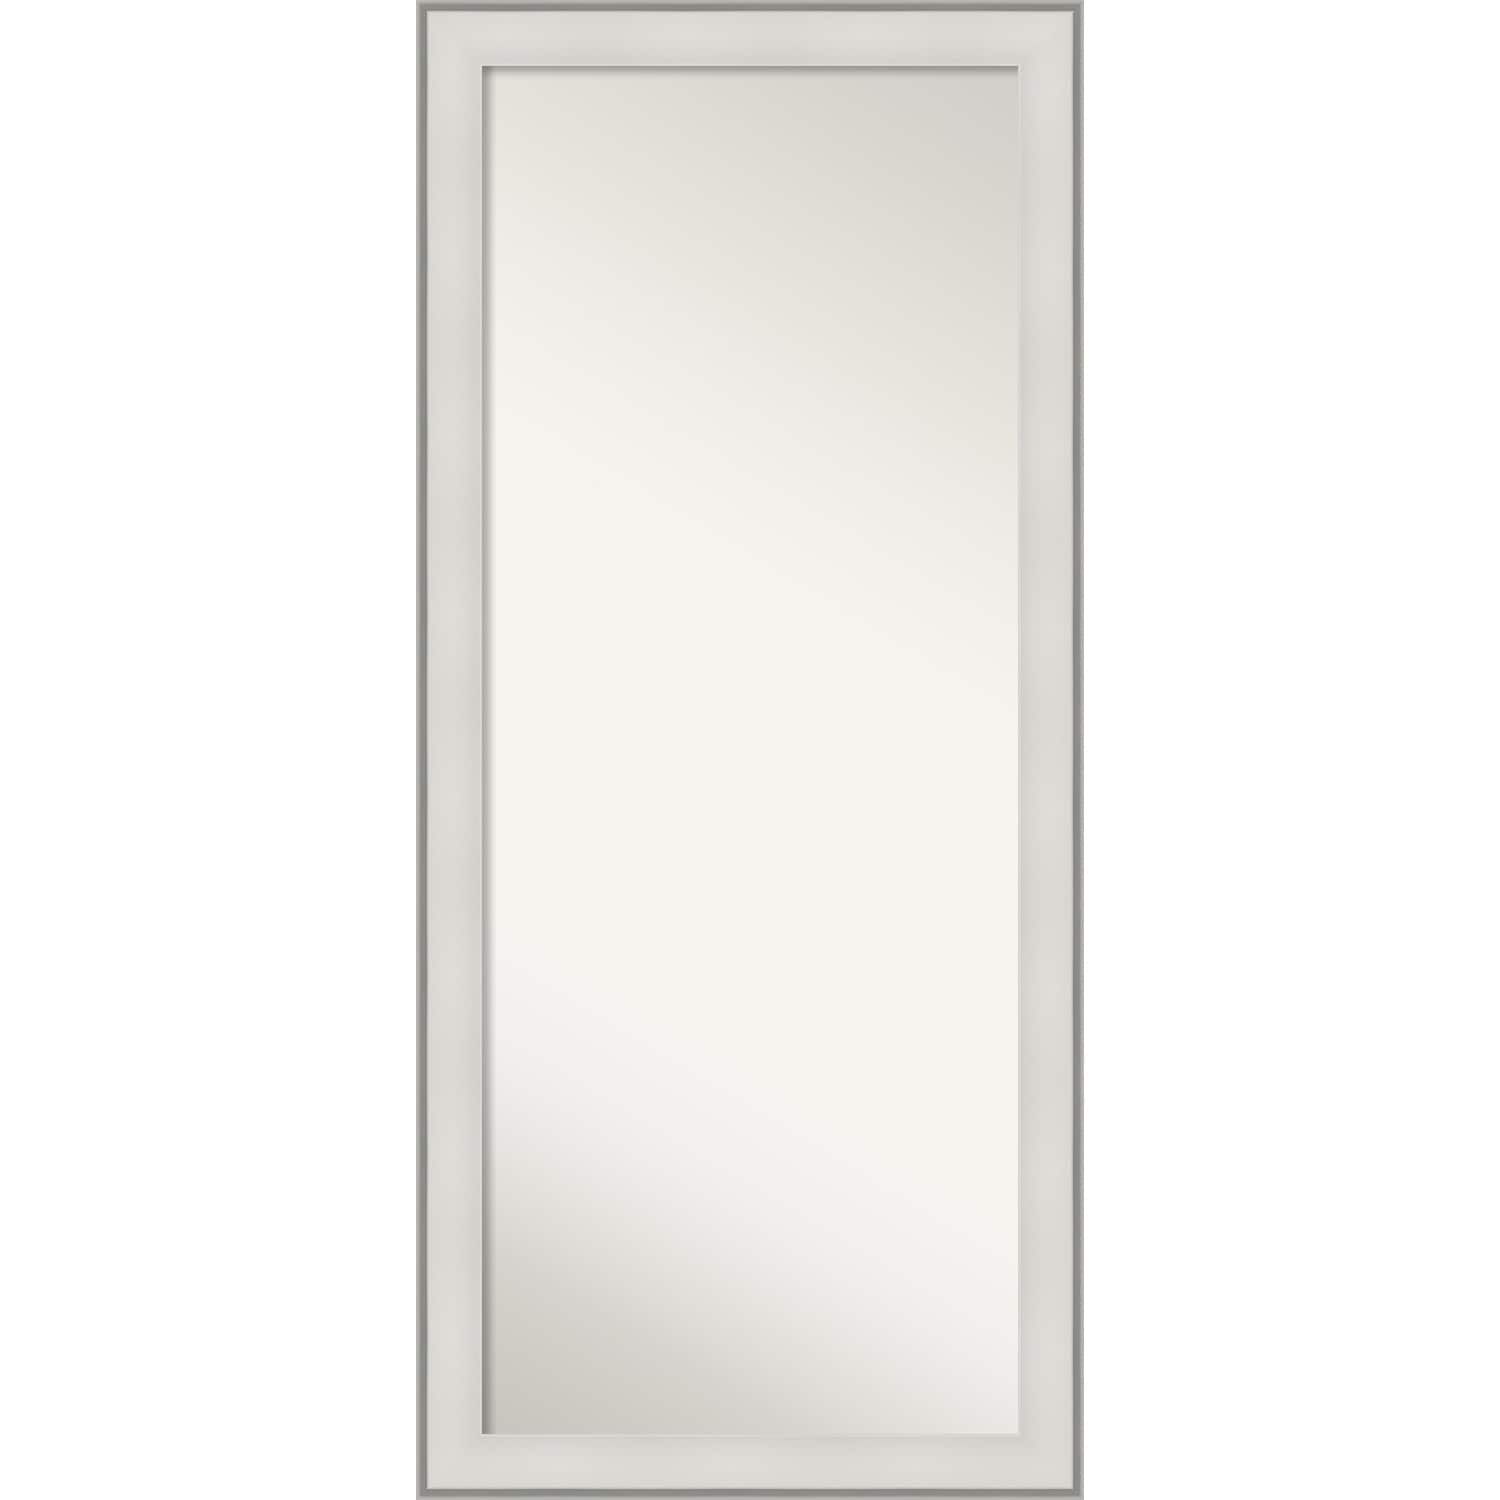 Non-Beveled Wood Full Length Floor Leaner Mirror Imperial Frame Outer  Size: 29 x 65 in Bed Bath  Beyond 32514476